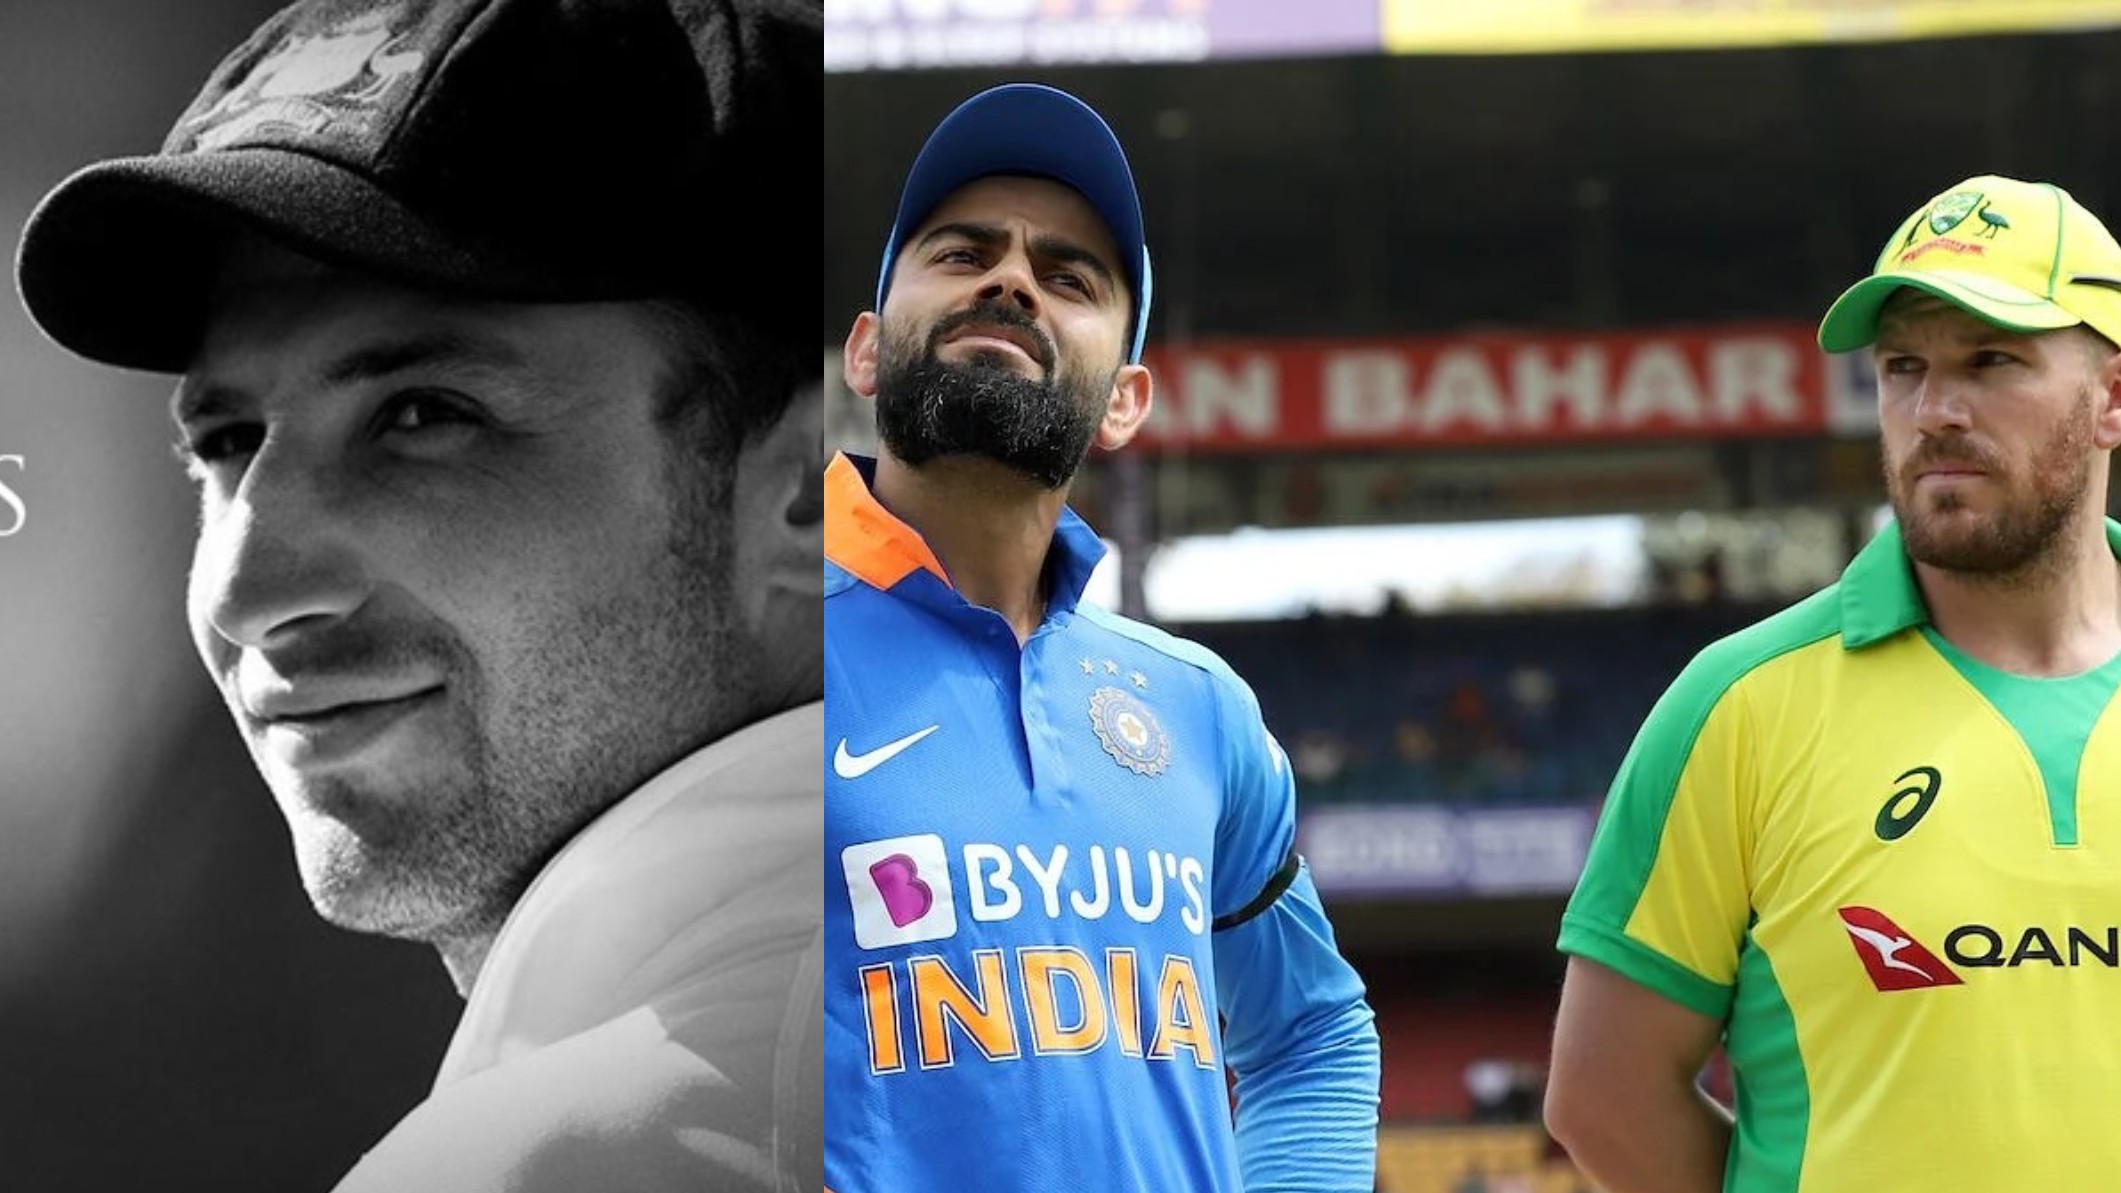 AUS v IND 2020-21: Australia and India players likely to pay tribute to Phil Hughes before 1st ODI